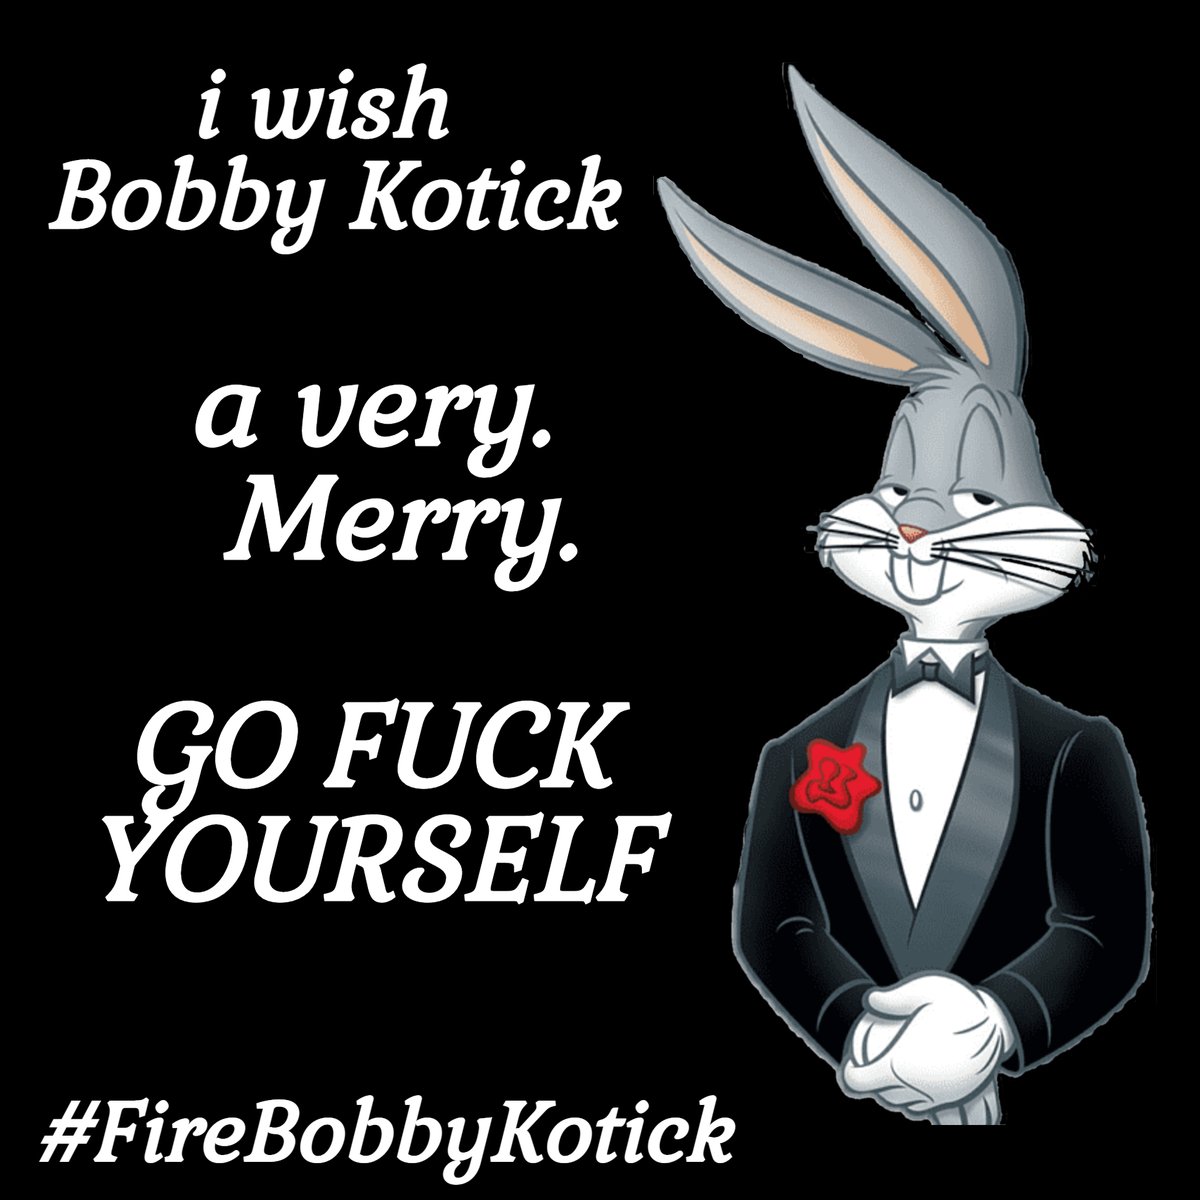 @DemShenanigans @_TechJess All this talk of money and Bobby K around this time of giving had me itching to make a new meme for ABKWA. Enjoy 😌

#FireBobbyKotick